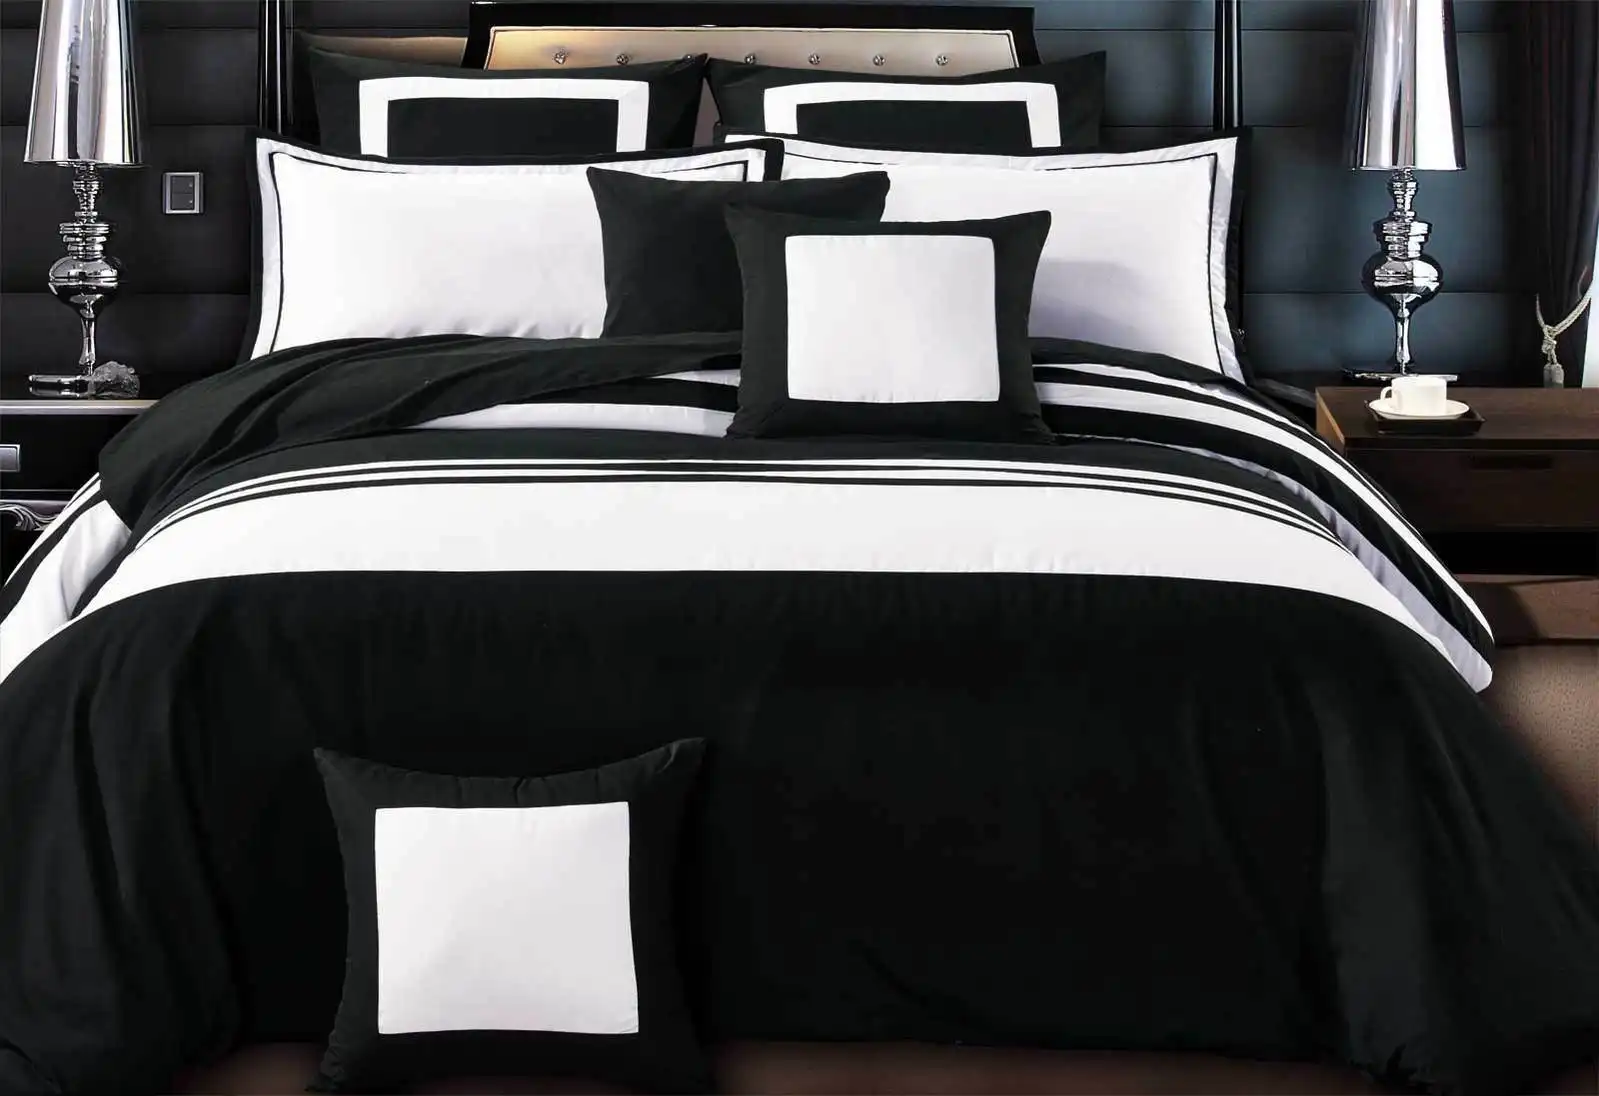 Luxton Rossier Black White Striped Quilt Cover Set